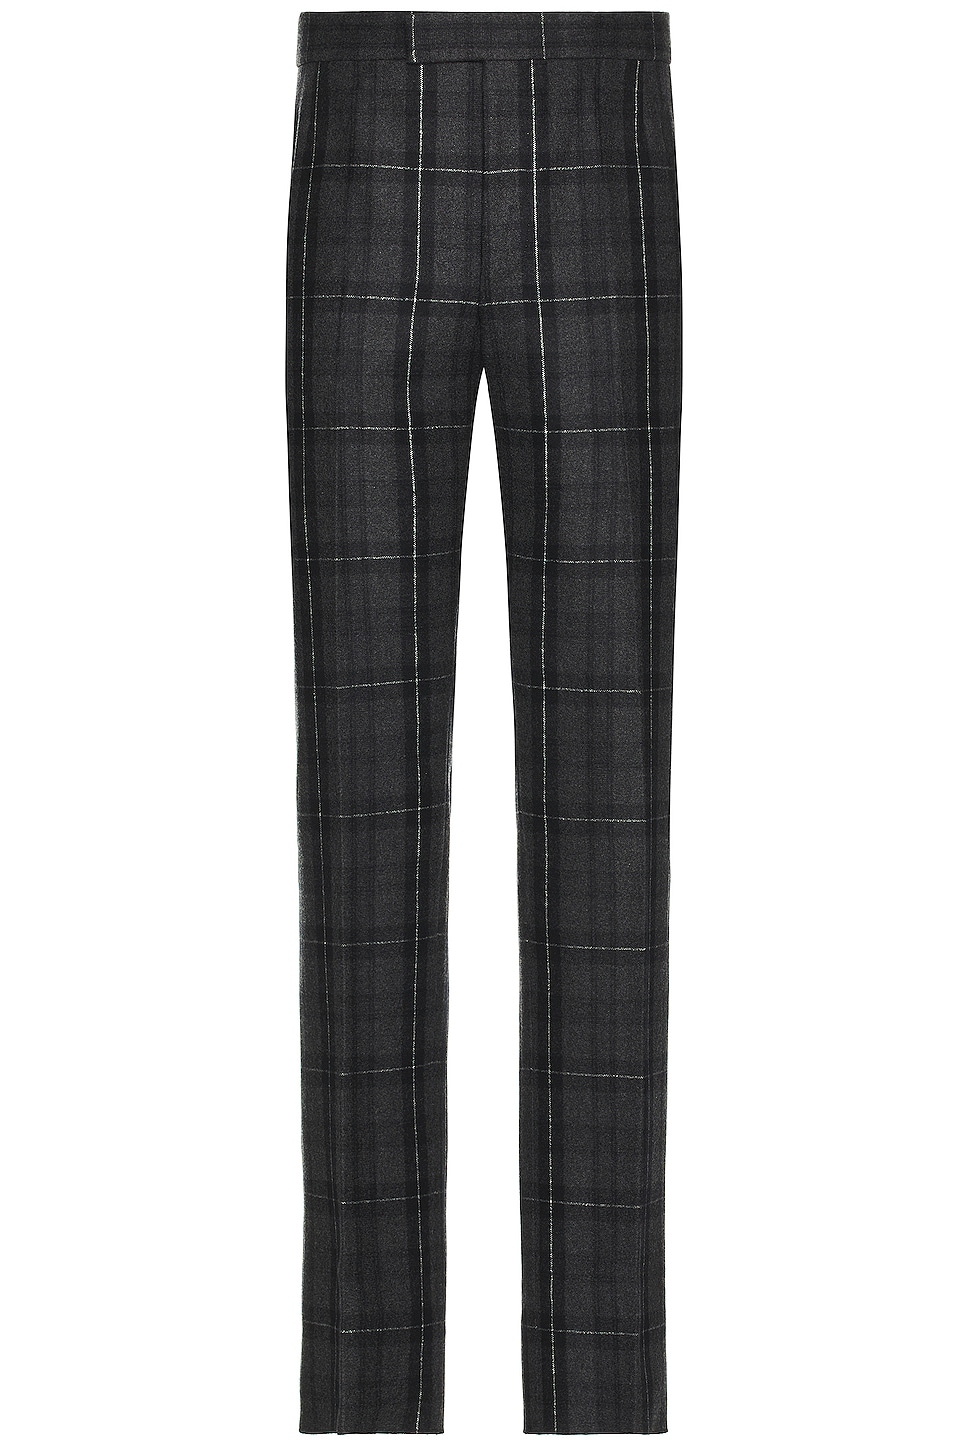 Image 1 of Thom Browne Fit 1 Backstrap Trouser in Charcoal